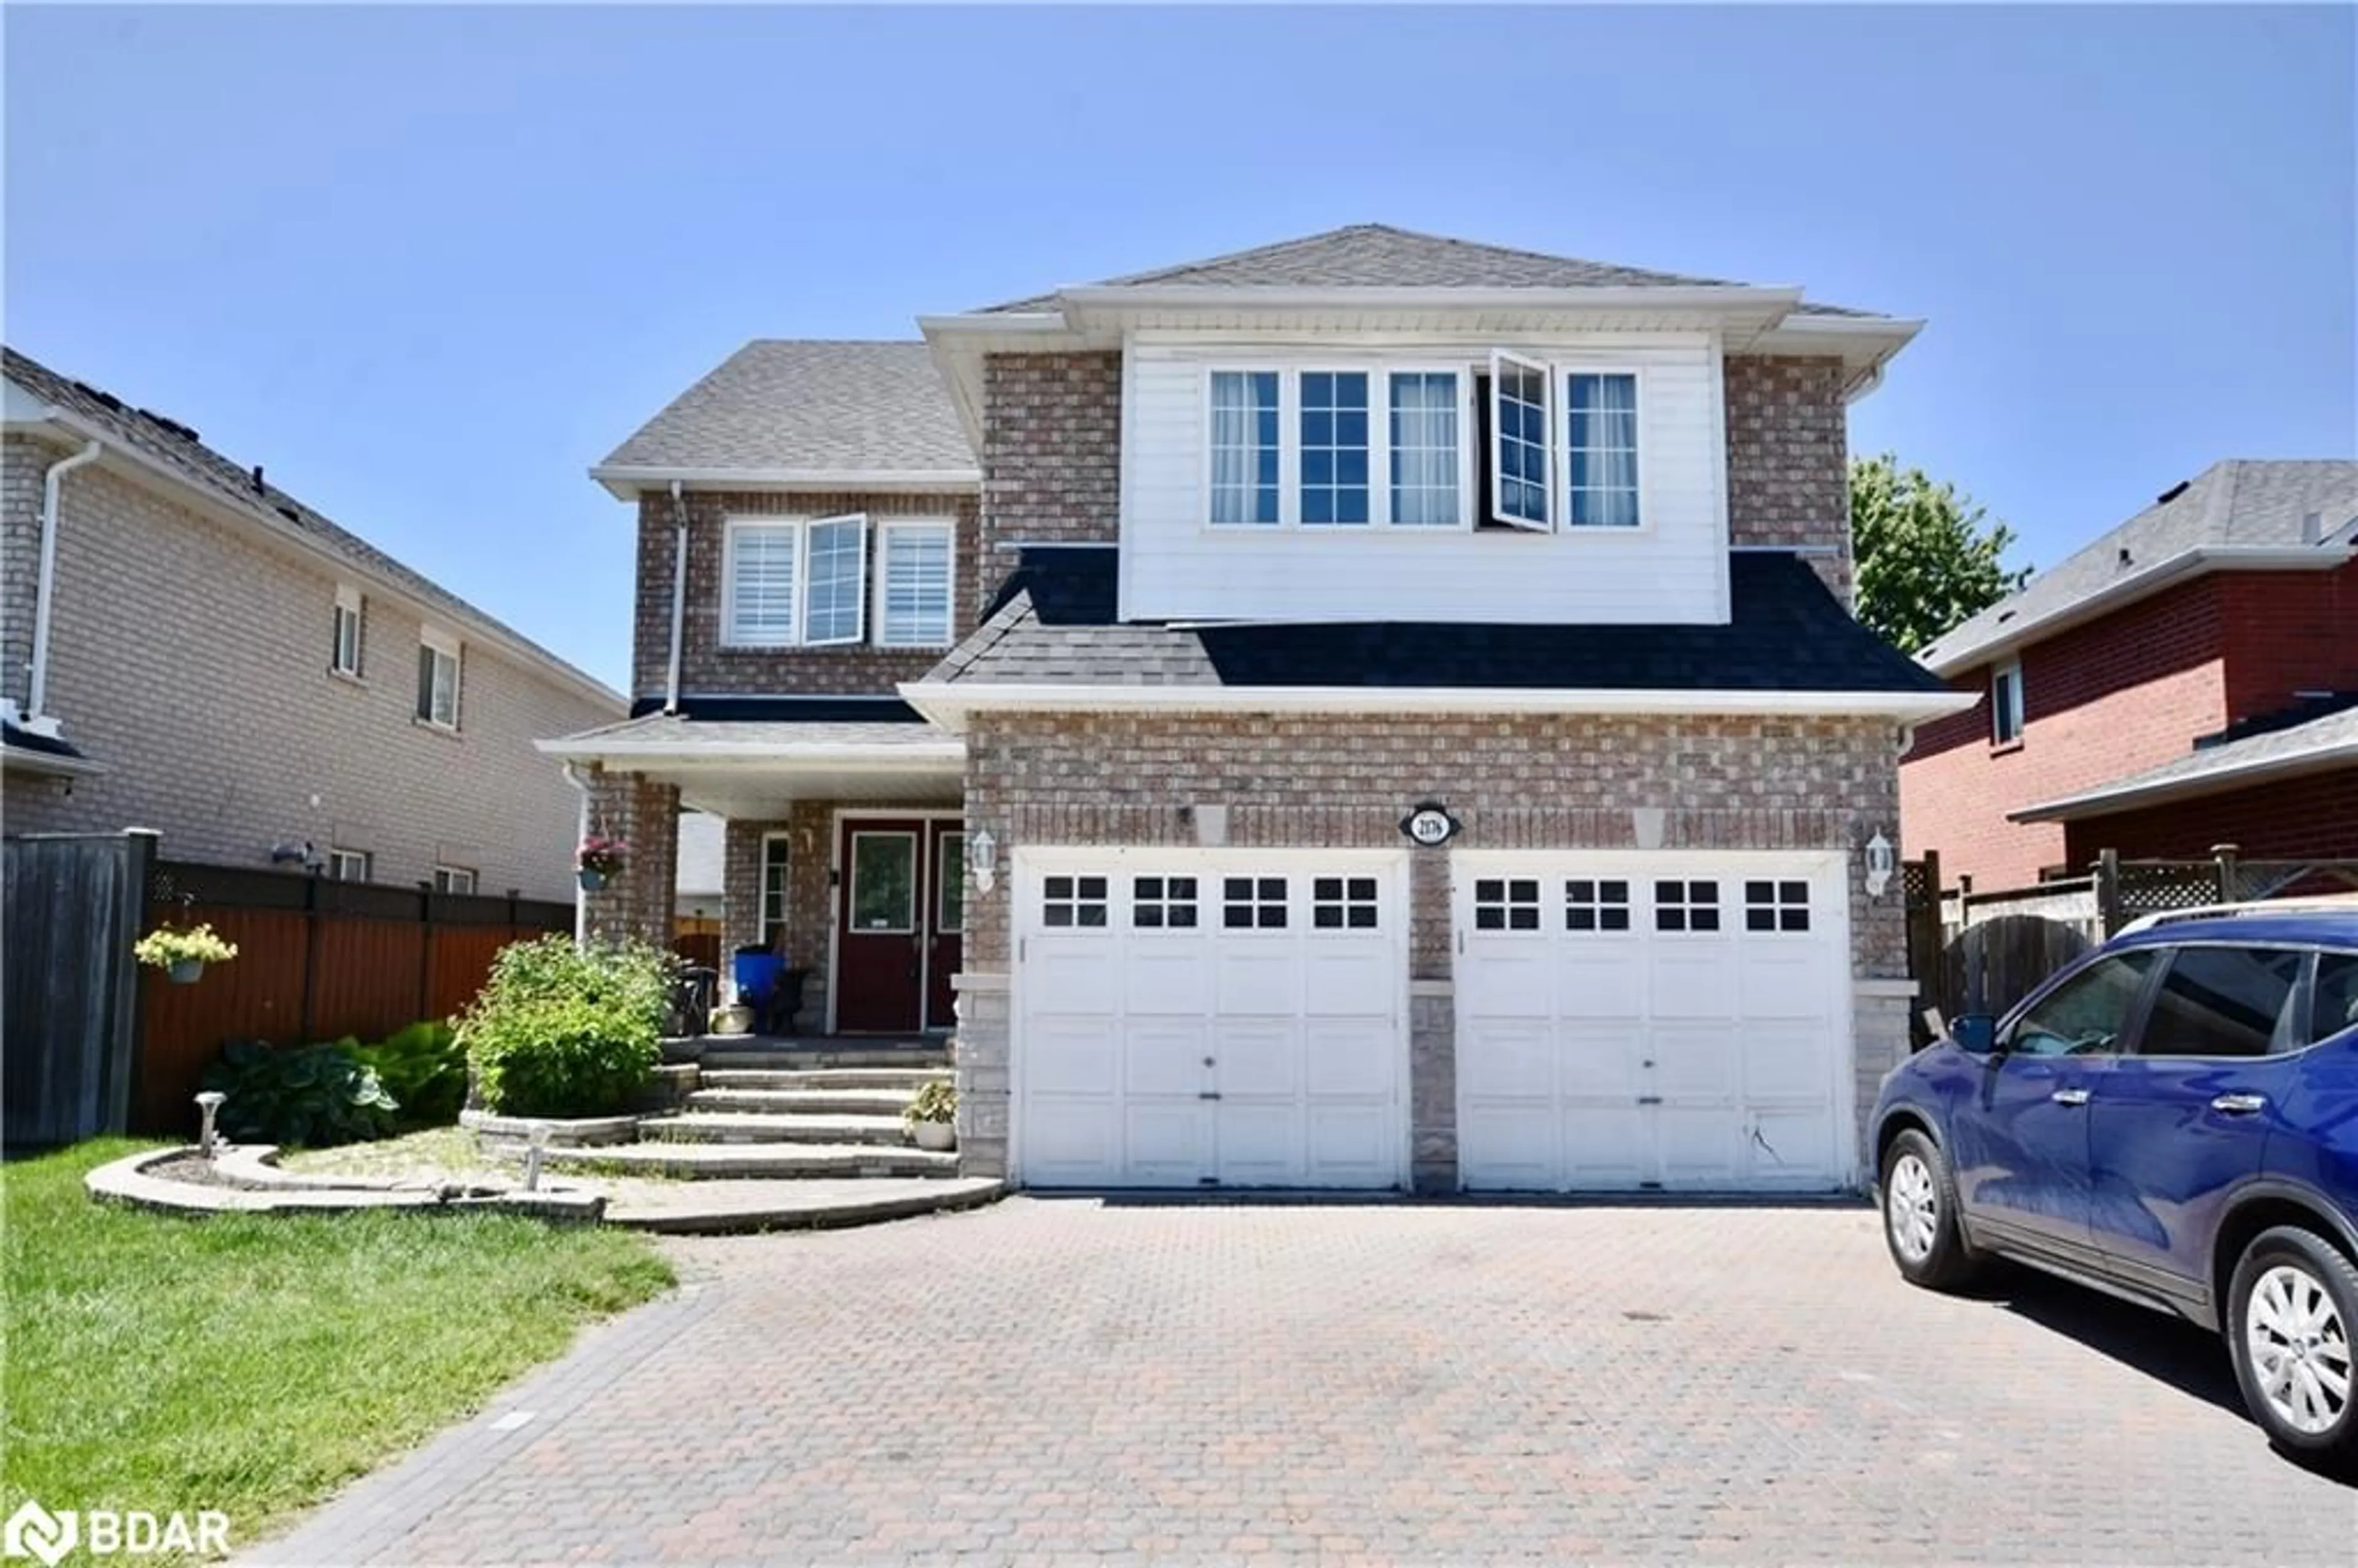 Home with brick exterior material for 2176 Adullam Ave, Innisfil Ontario L9S 2B3